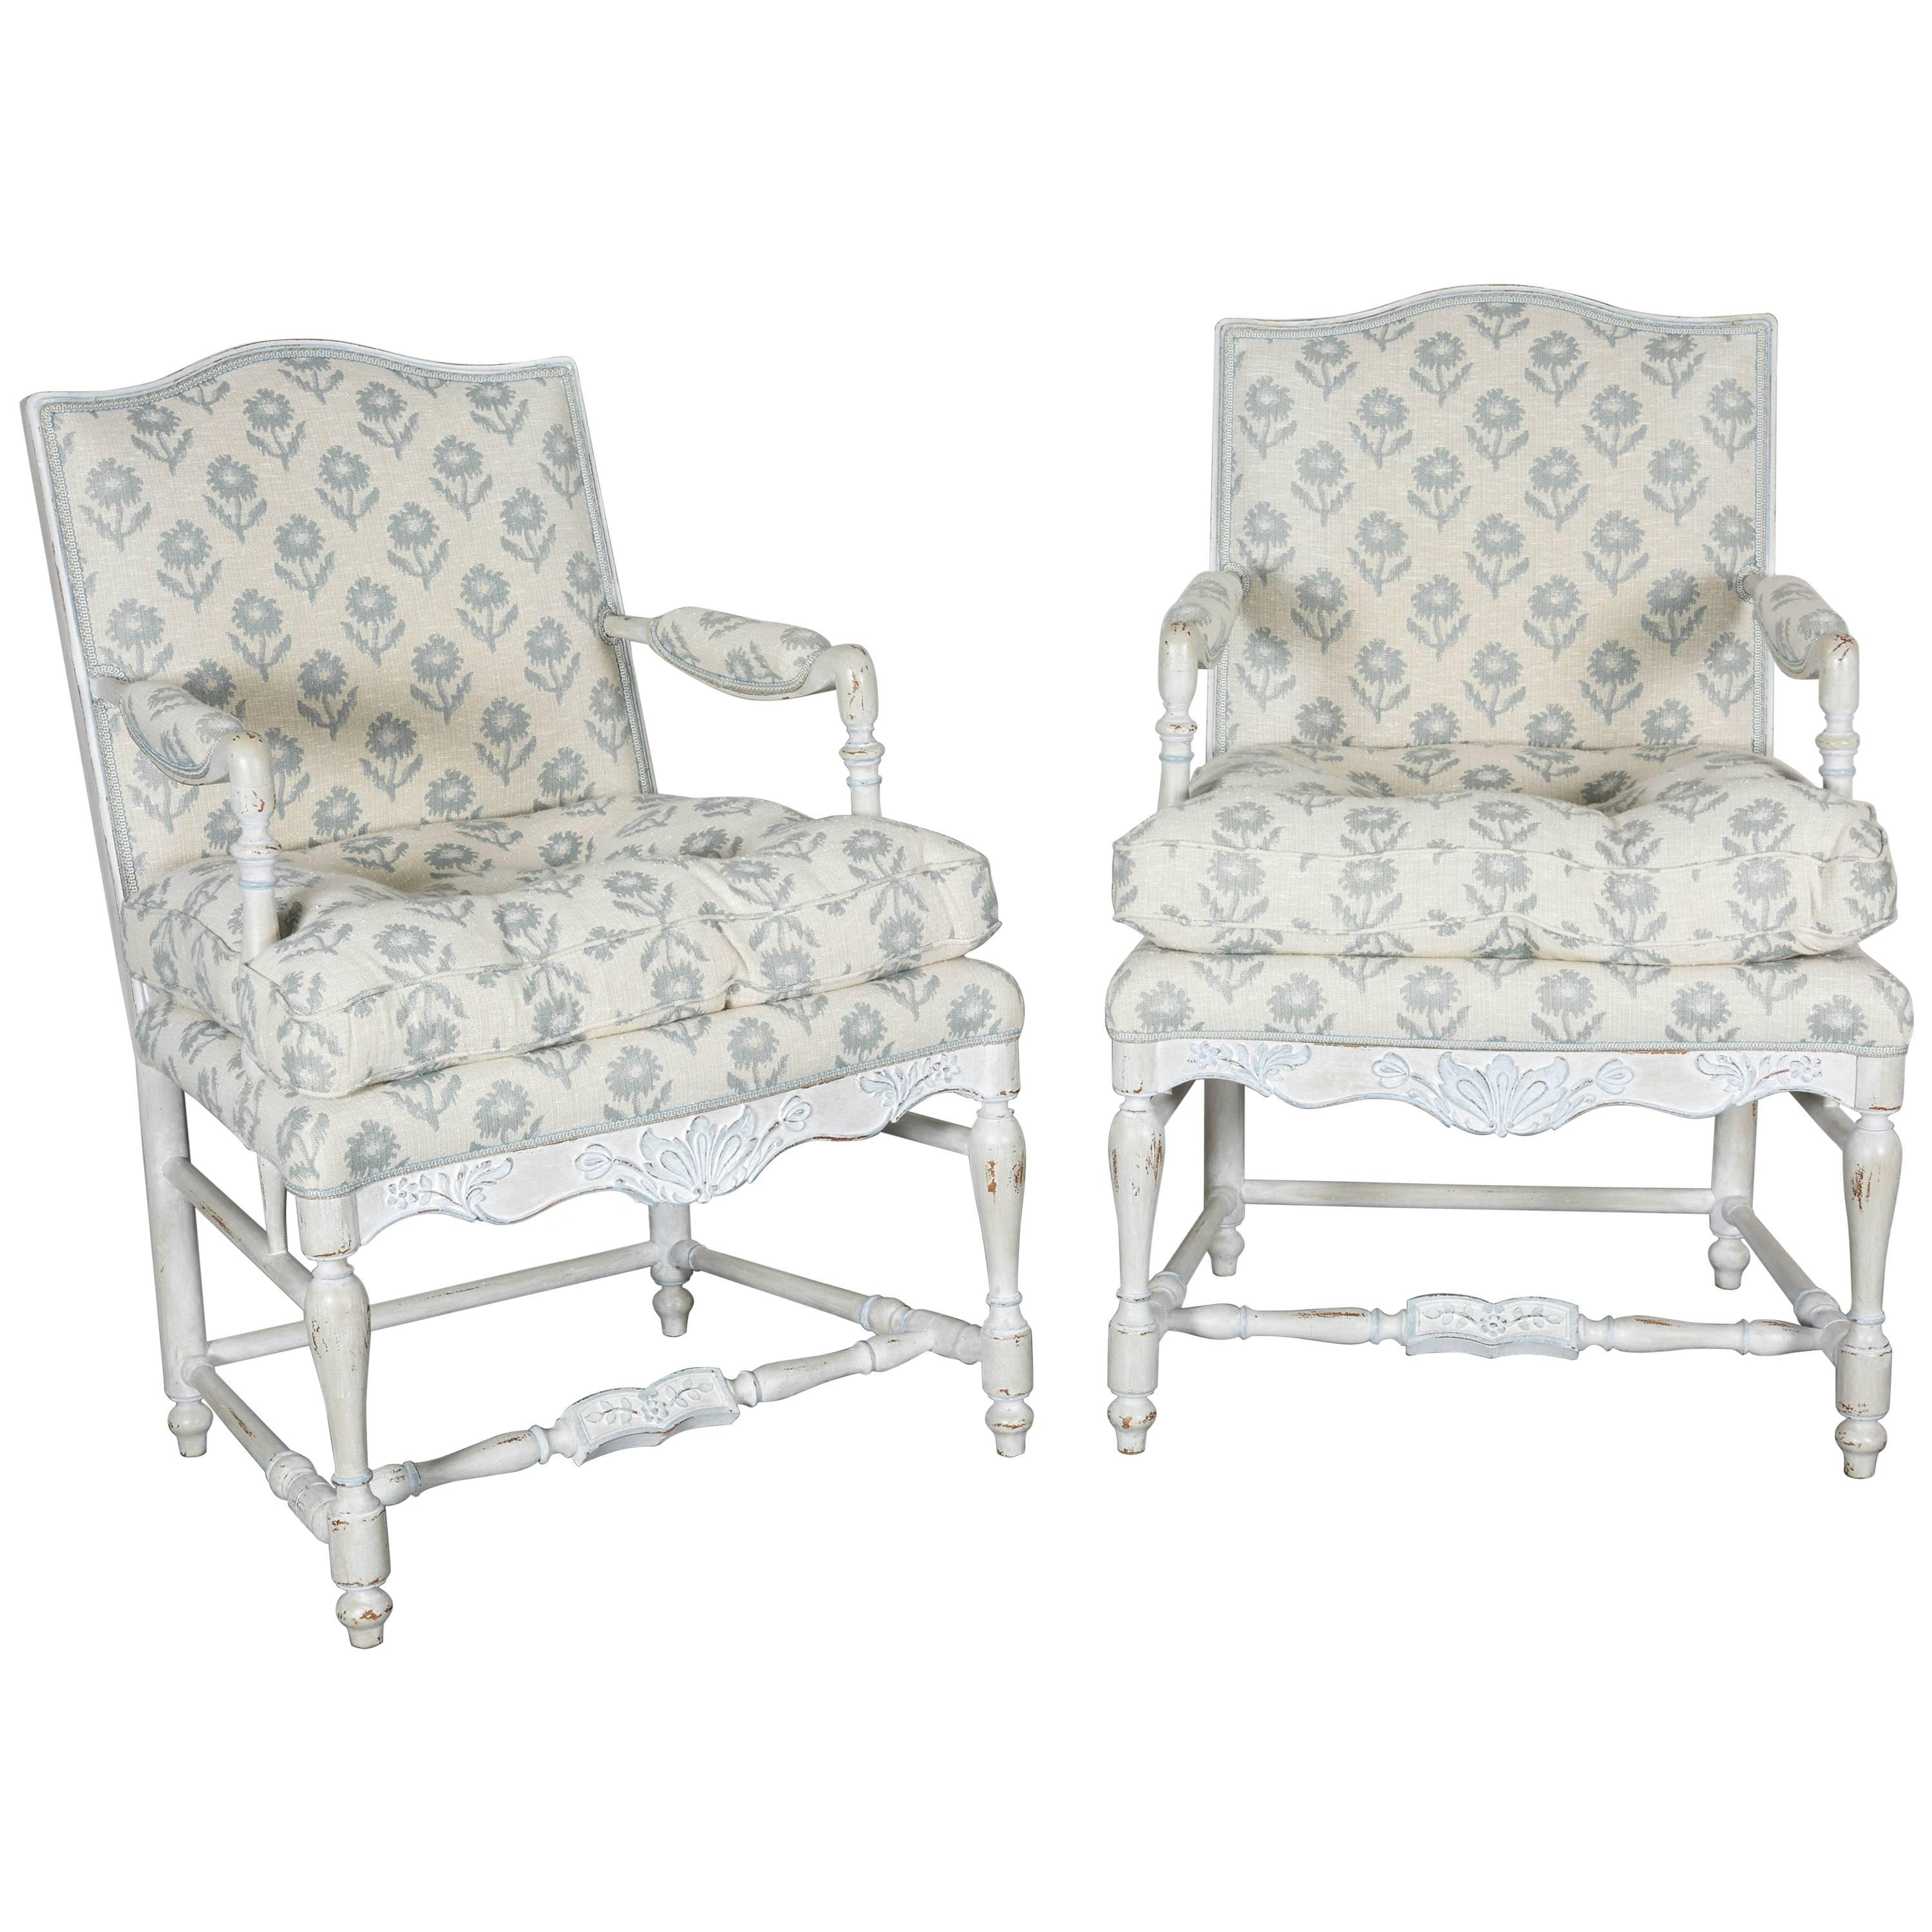 Pair of Louis XV Provincial White and Blue-Painted Armchairs